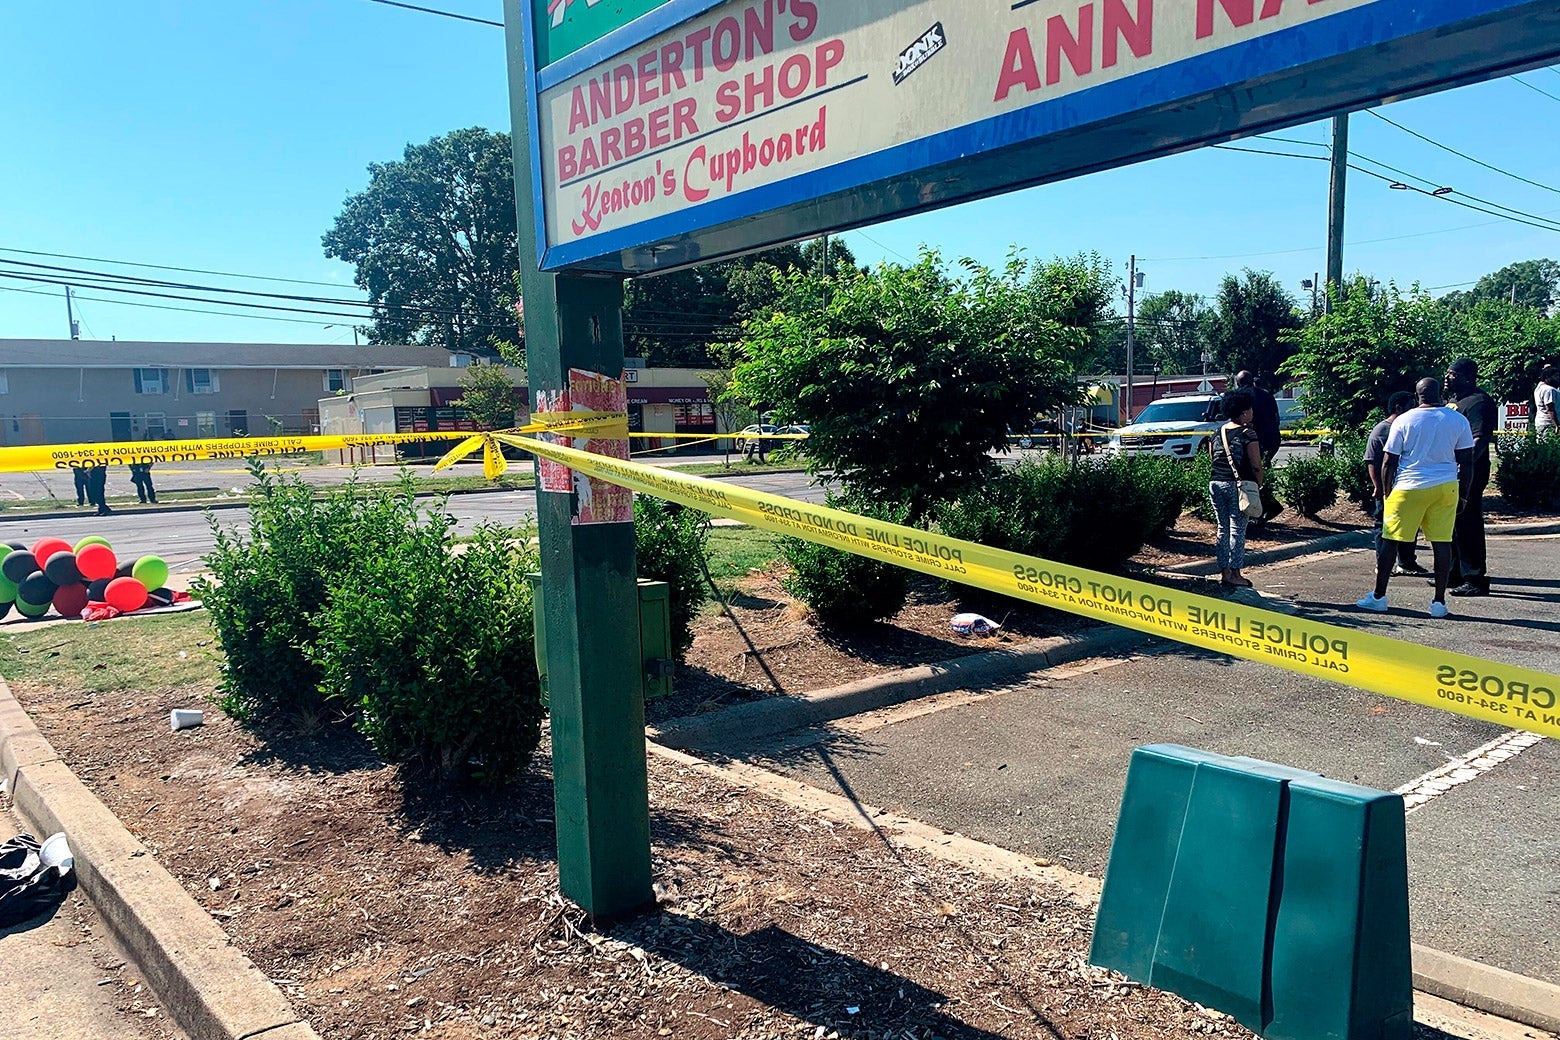 Police tape is seen near the scene of a shooting on June 22, 2020 in Charlotte, North Carolina, that resulted in two deaths and several more people wounded or injured.